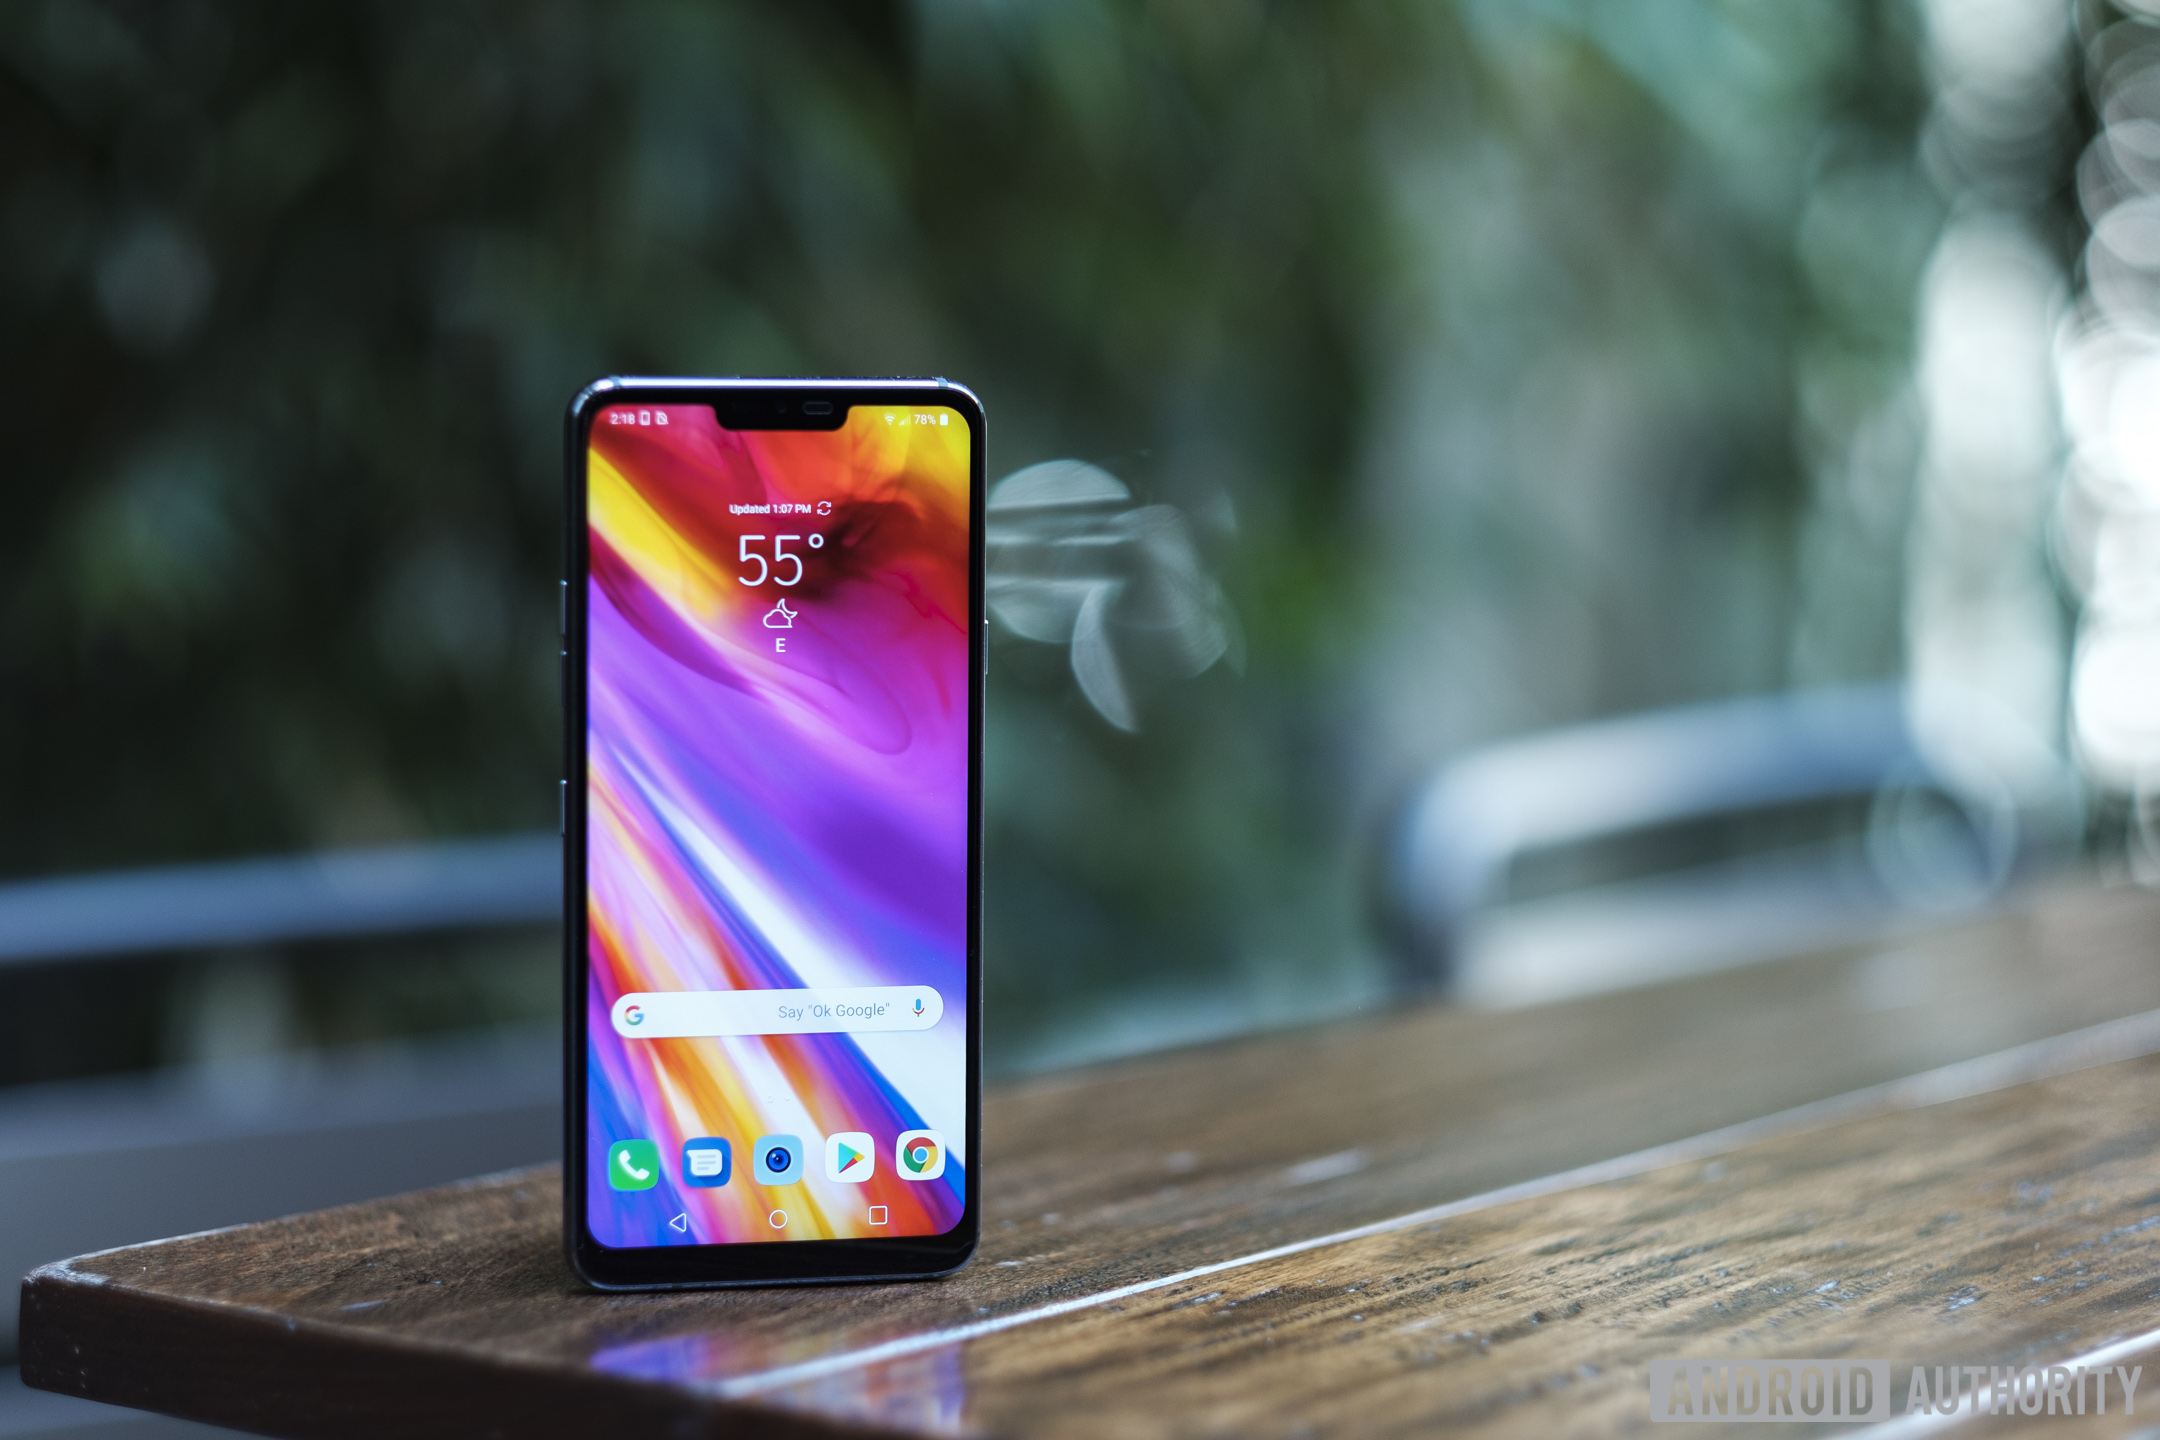 LG G7 ThinQ home screen on table